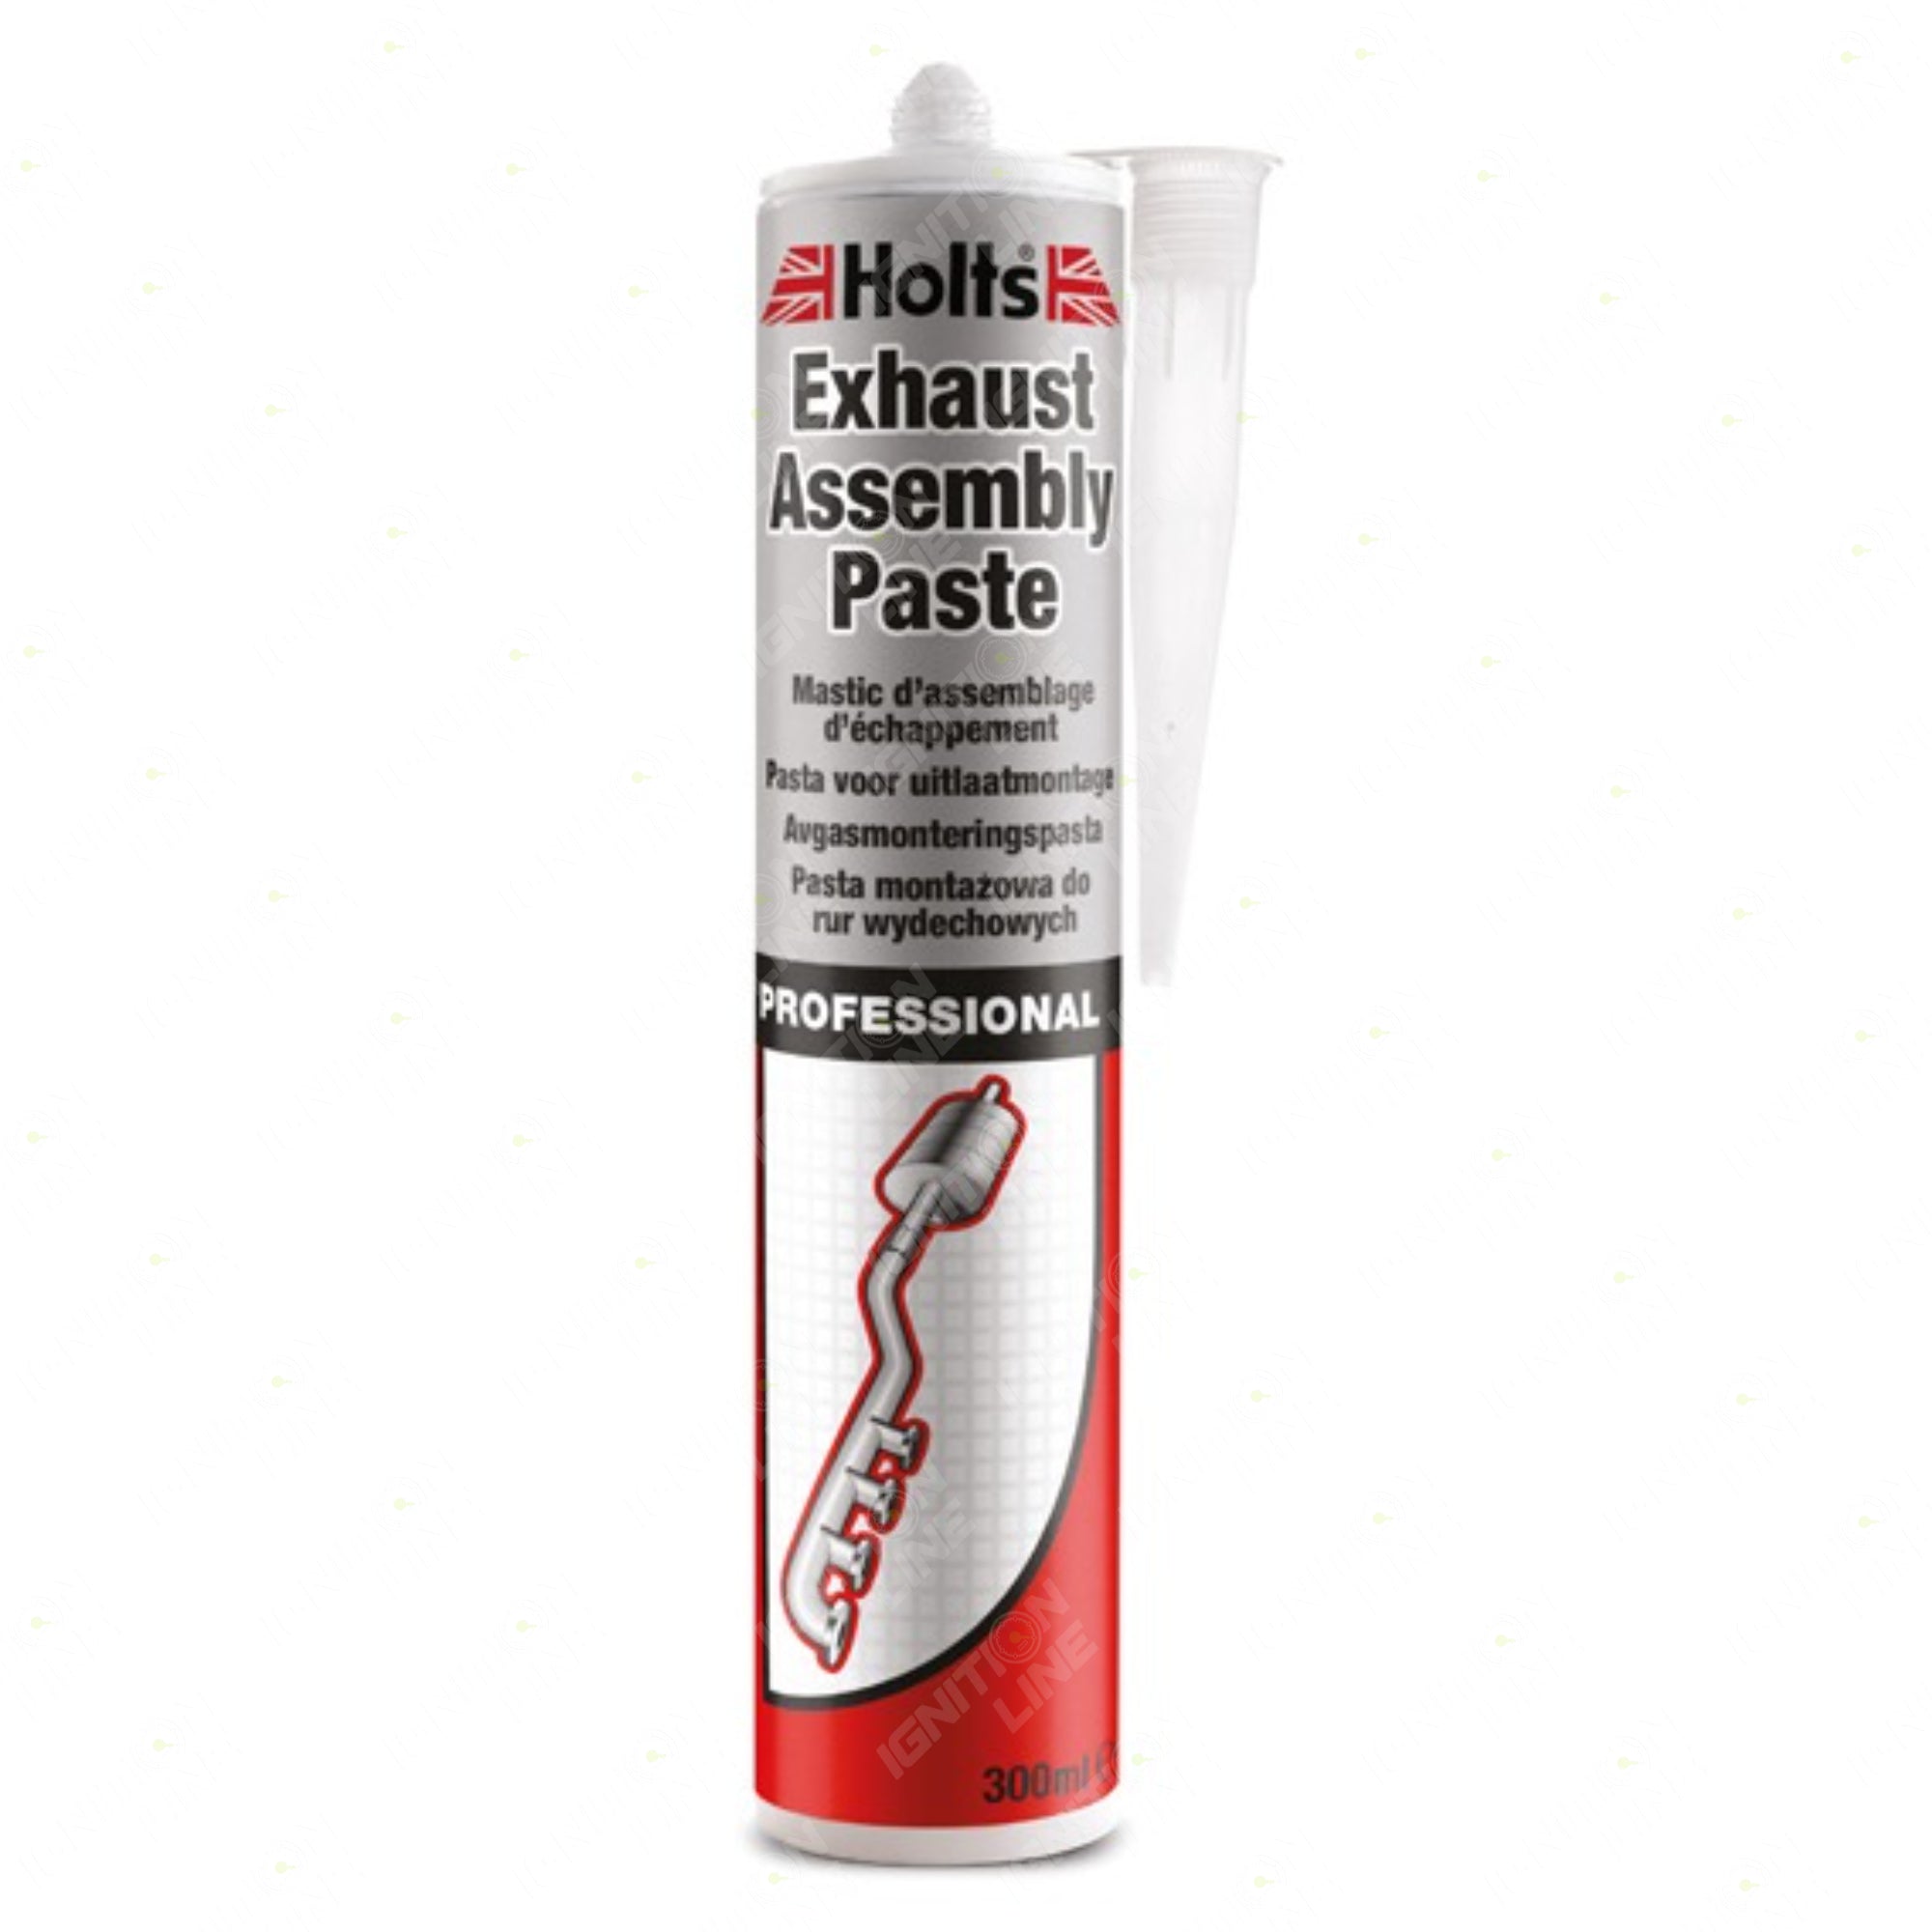 Holts Exhaust Assembly Paste 300ml